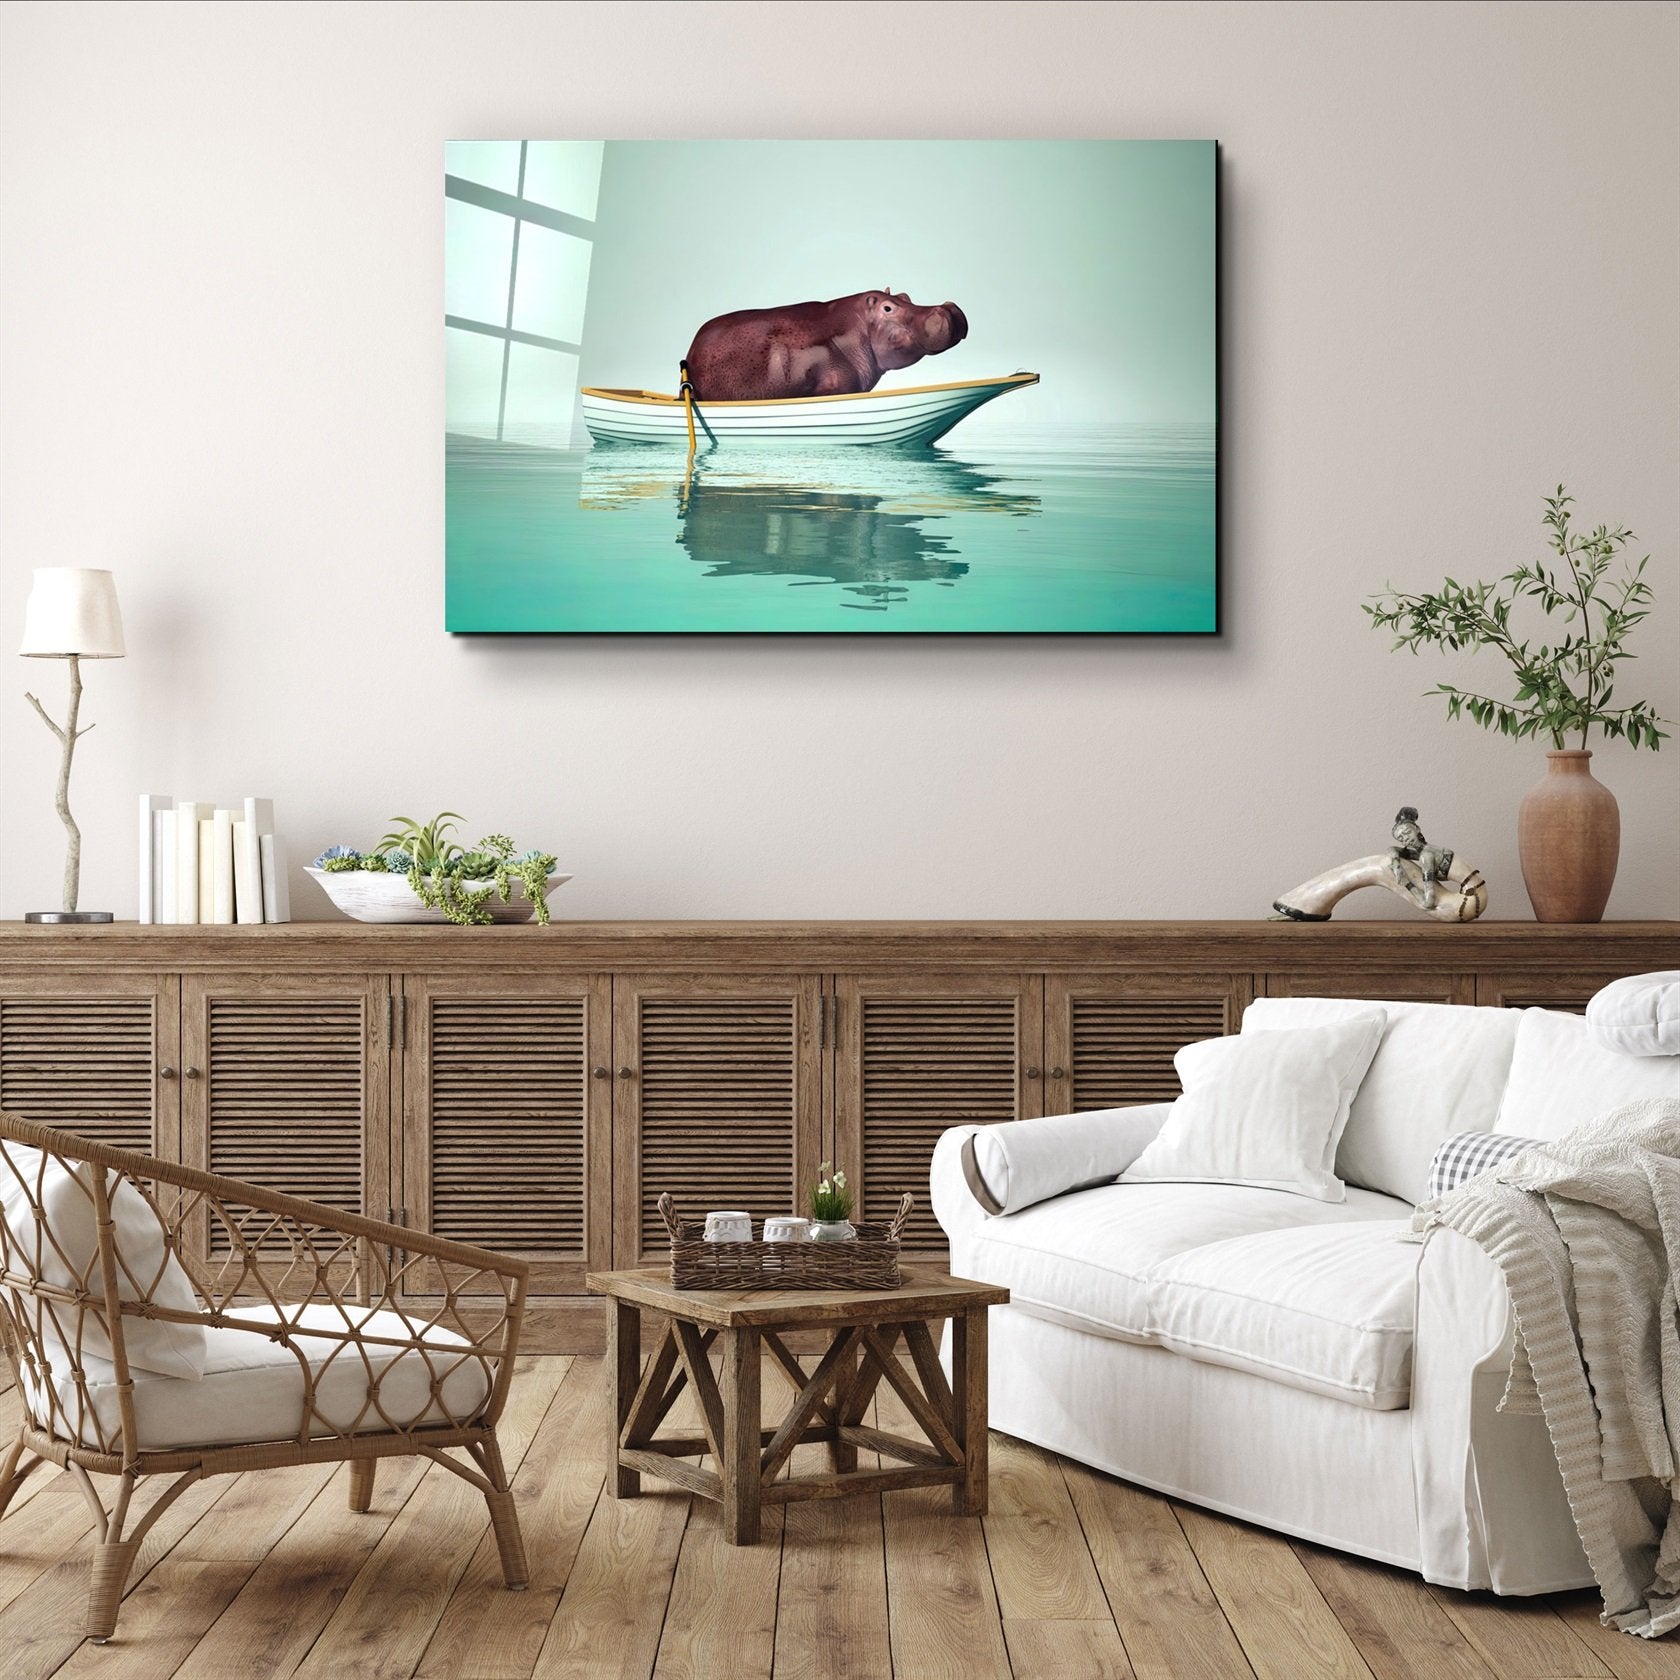 ・"Hippo on the Boat 1"・Glass Wall Art